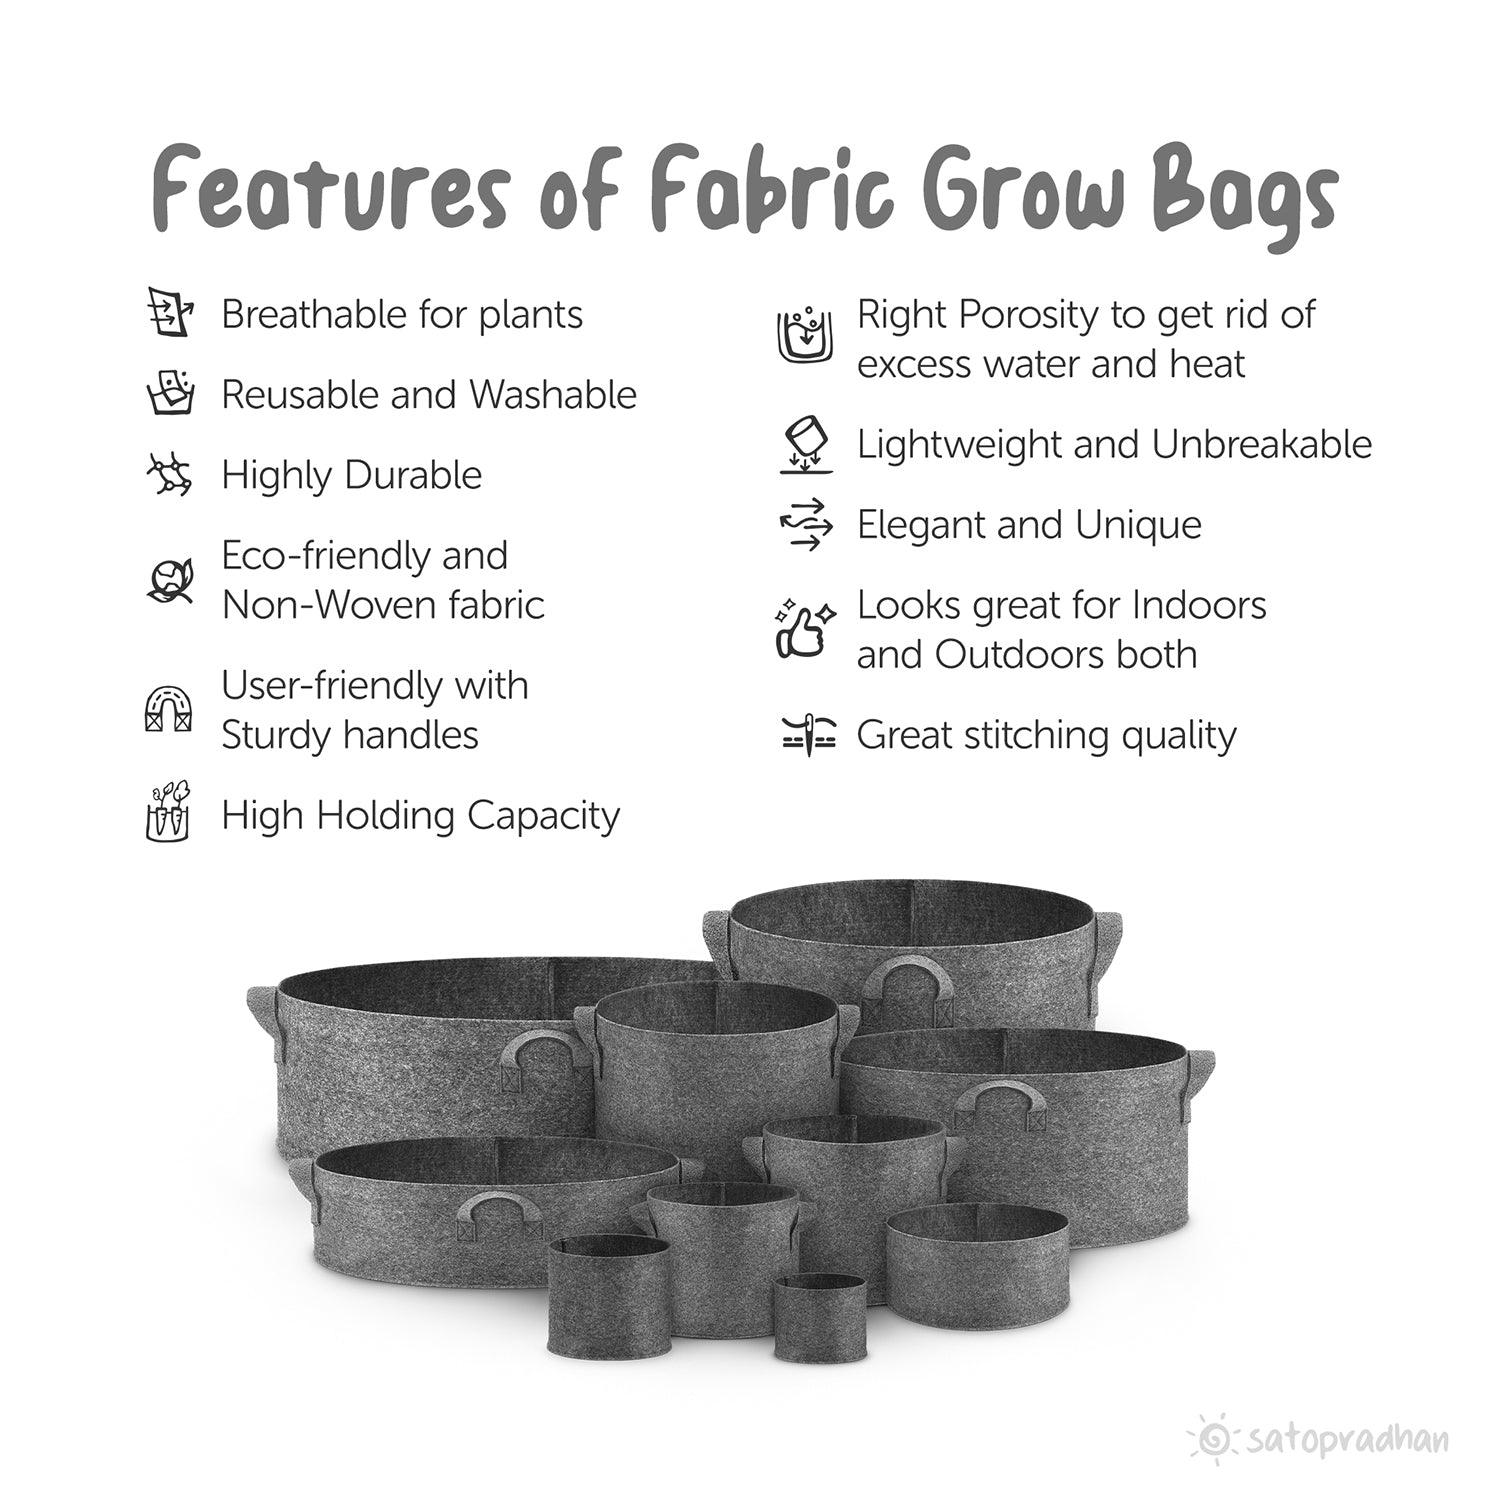 12"x11" Round Dark Grey Fabric Grow Bag-Single | Eco-friendly, Breathable, Washable & Lightweight planter made using Non-woven recyclable fabric - Satopradhan